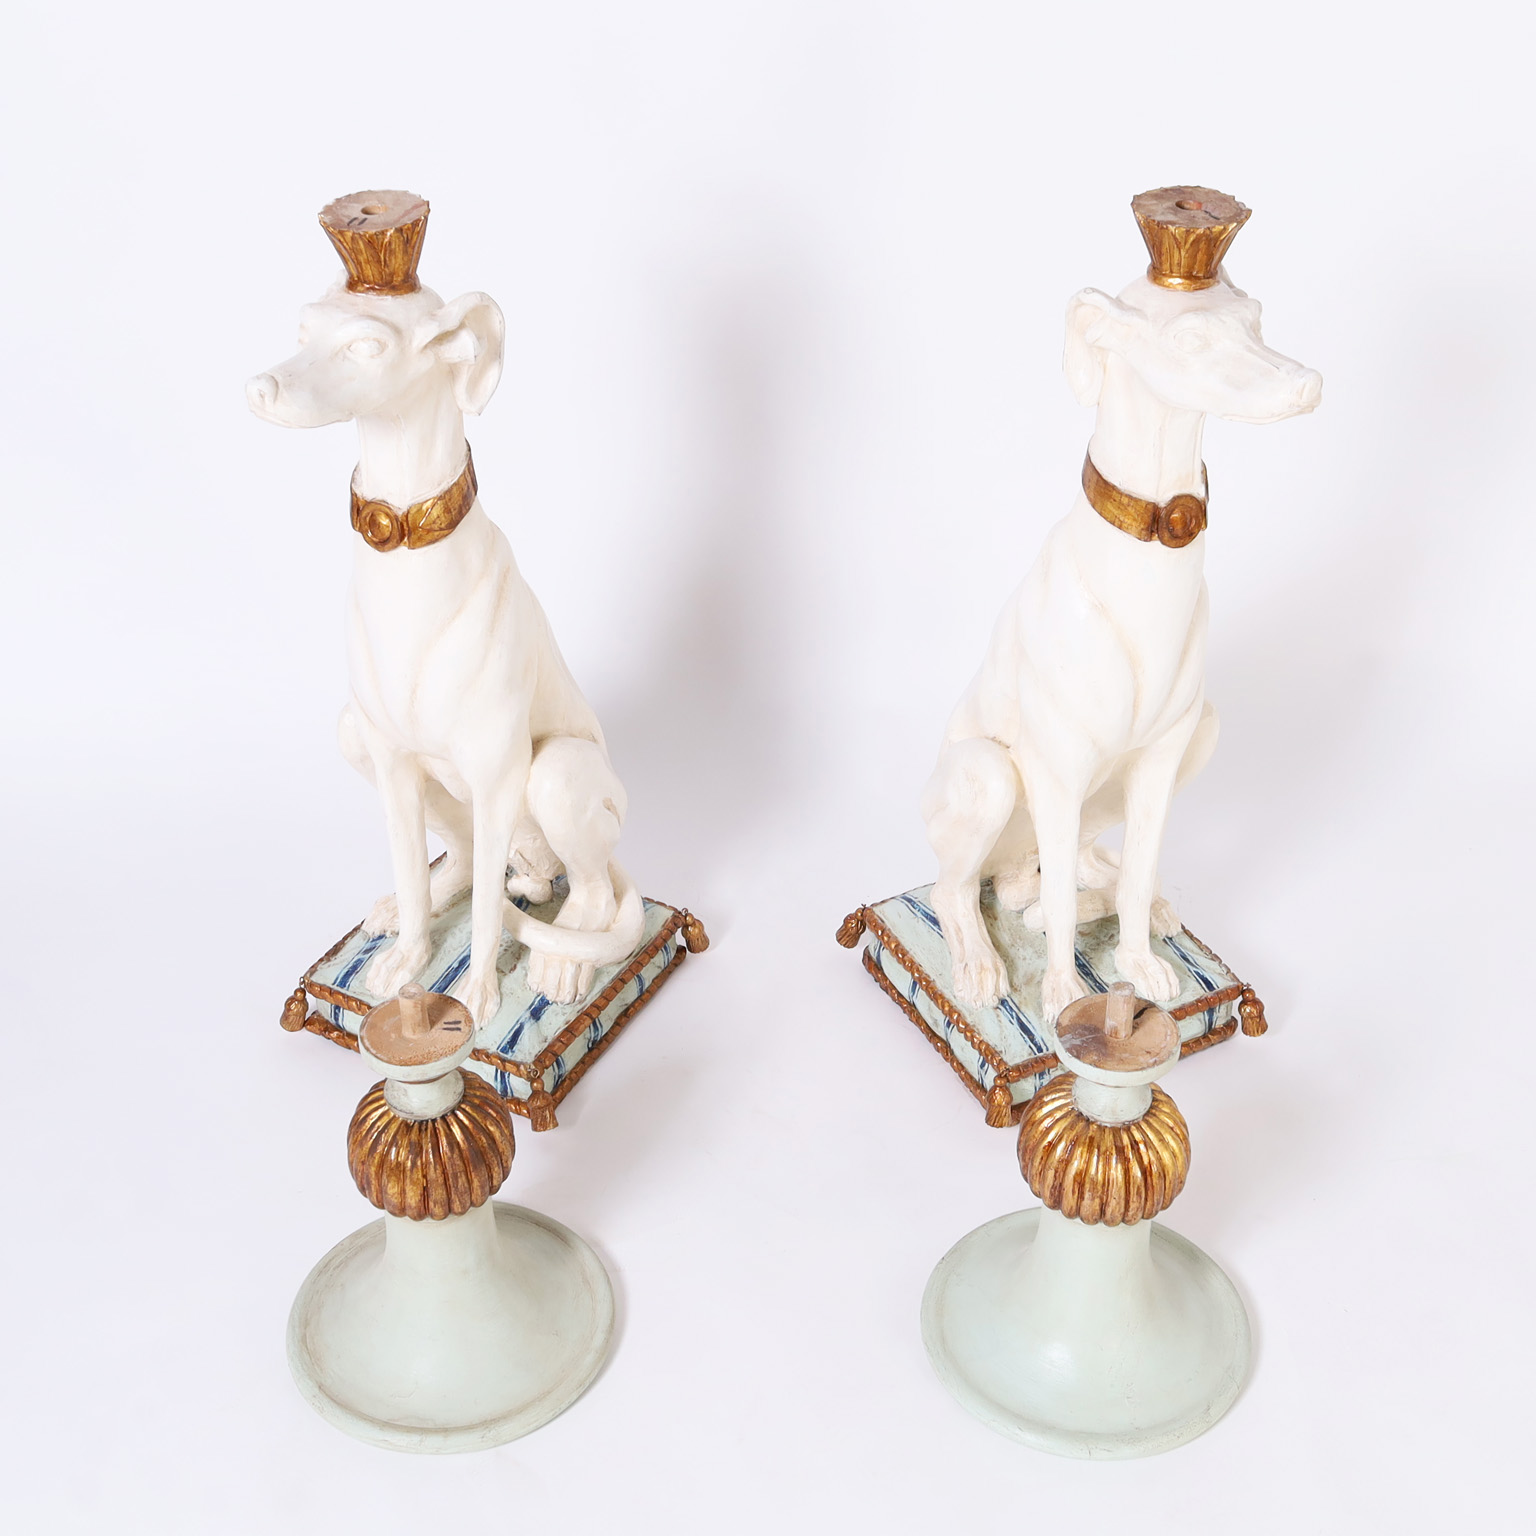 Pair of Antique Italian Parcel Gilt Carved Wood Whippets with Urns